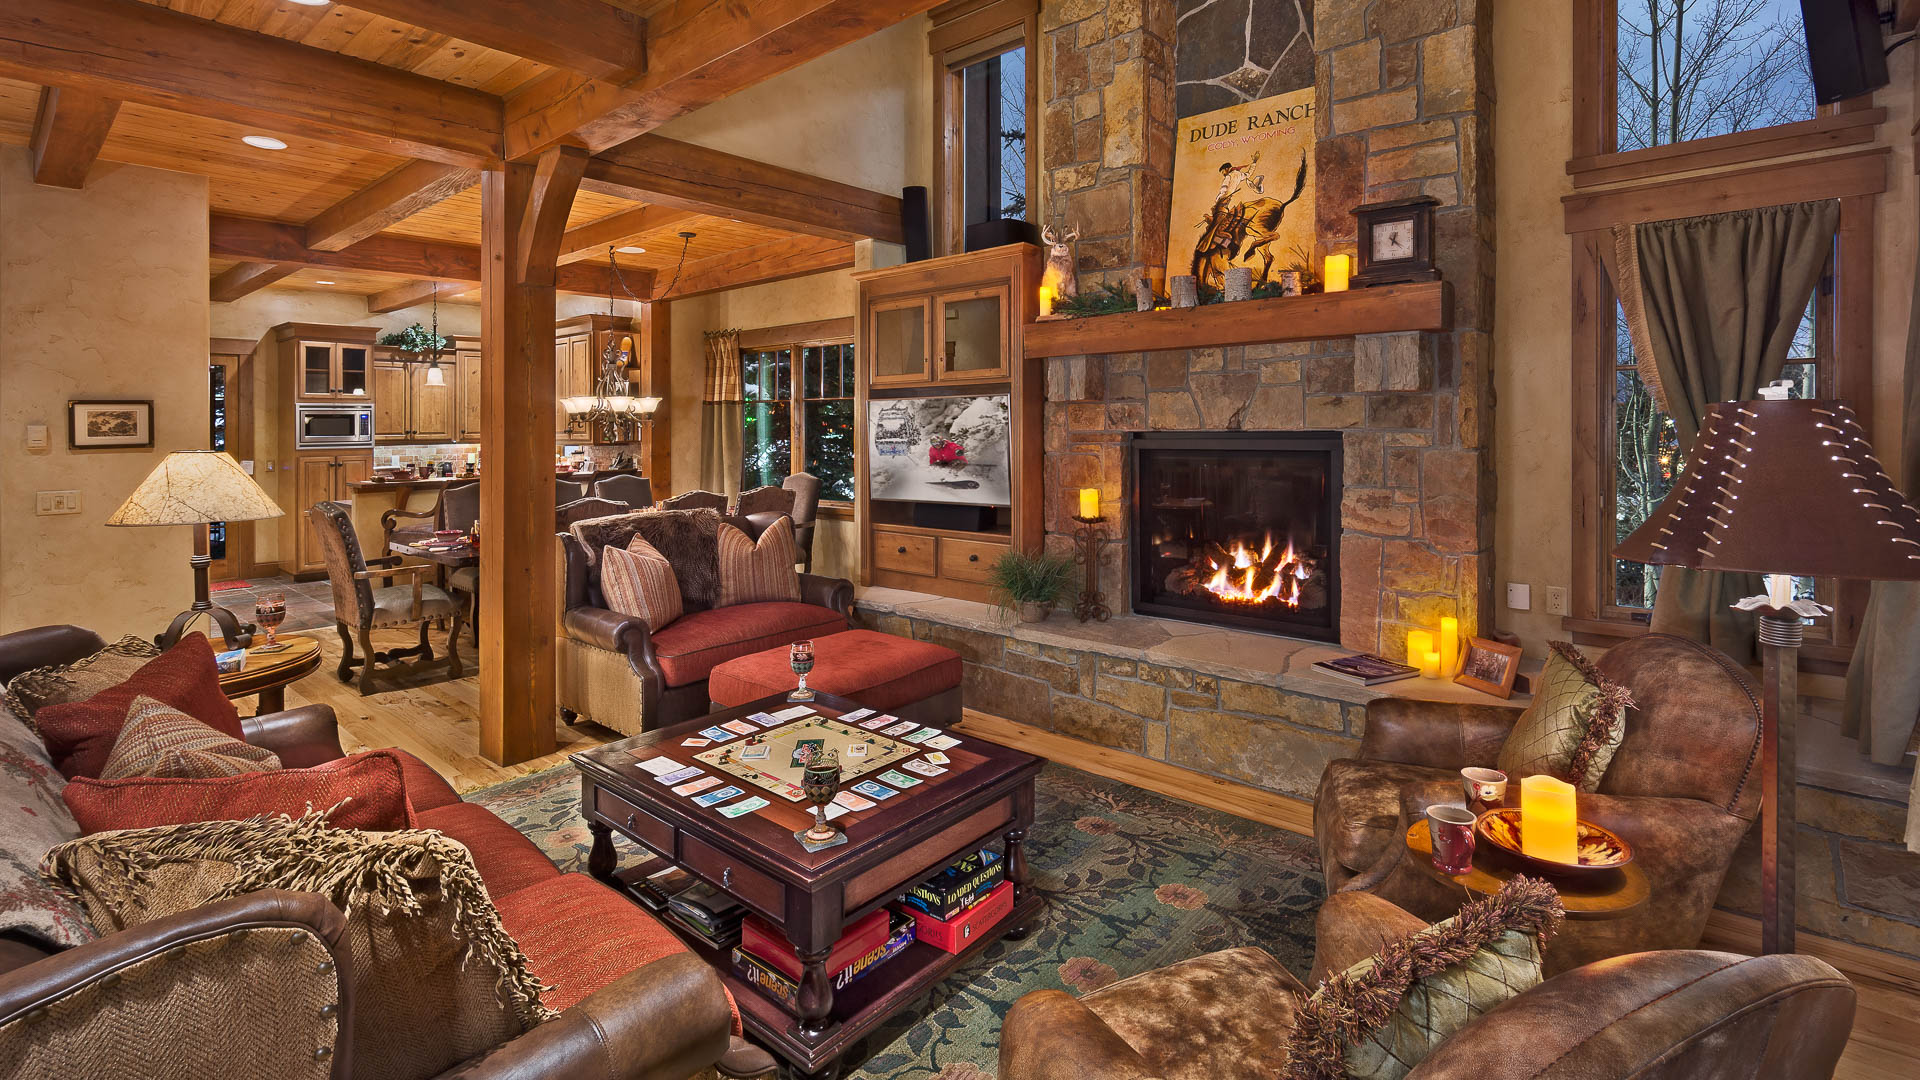 Great room with fireplace